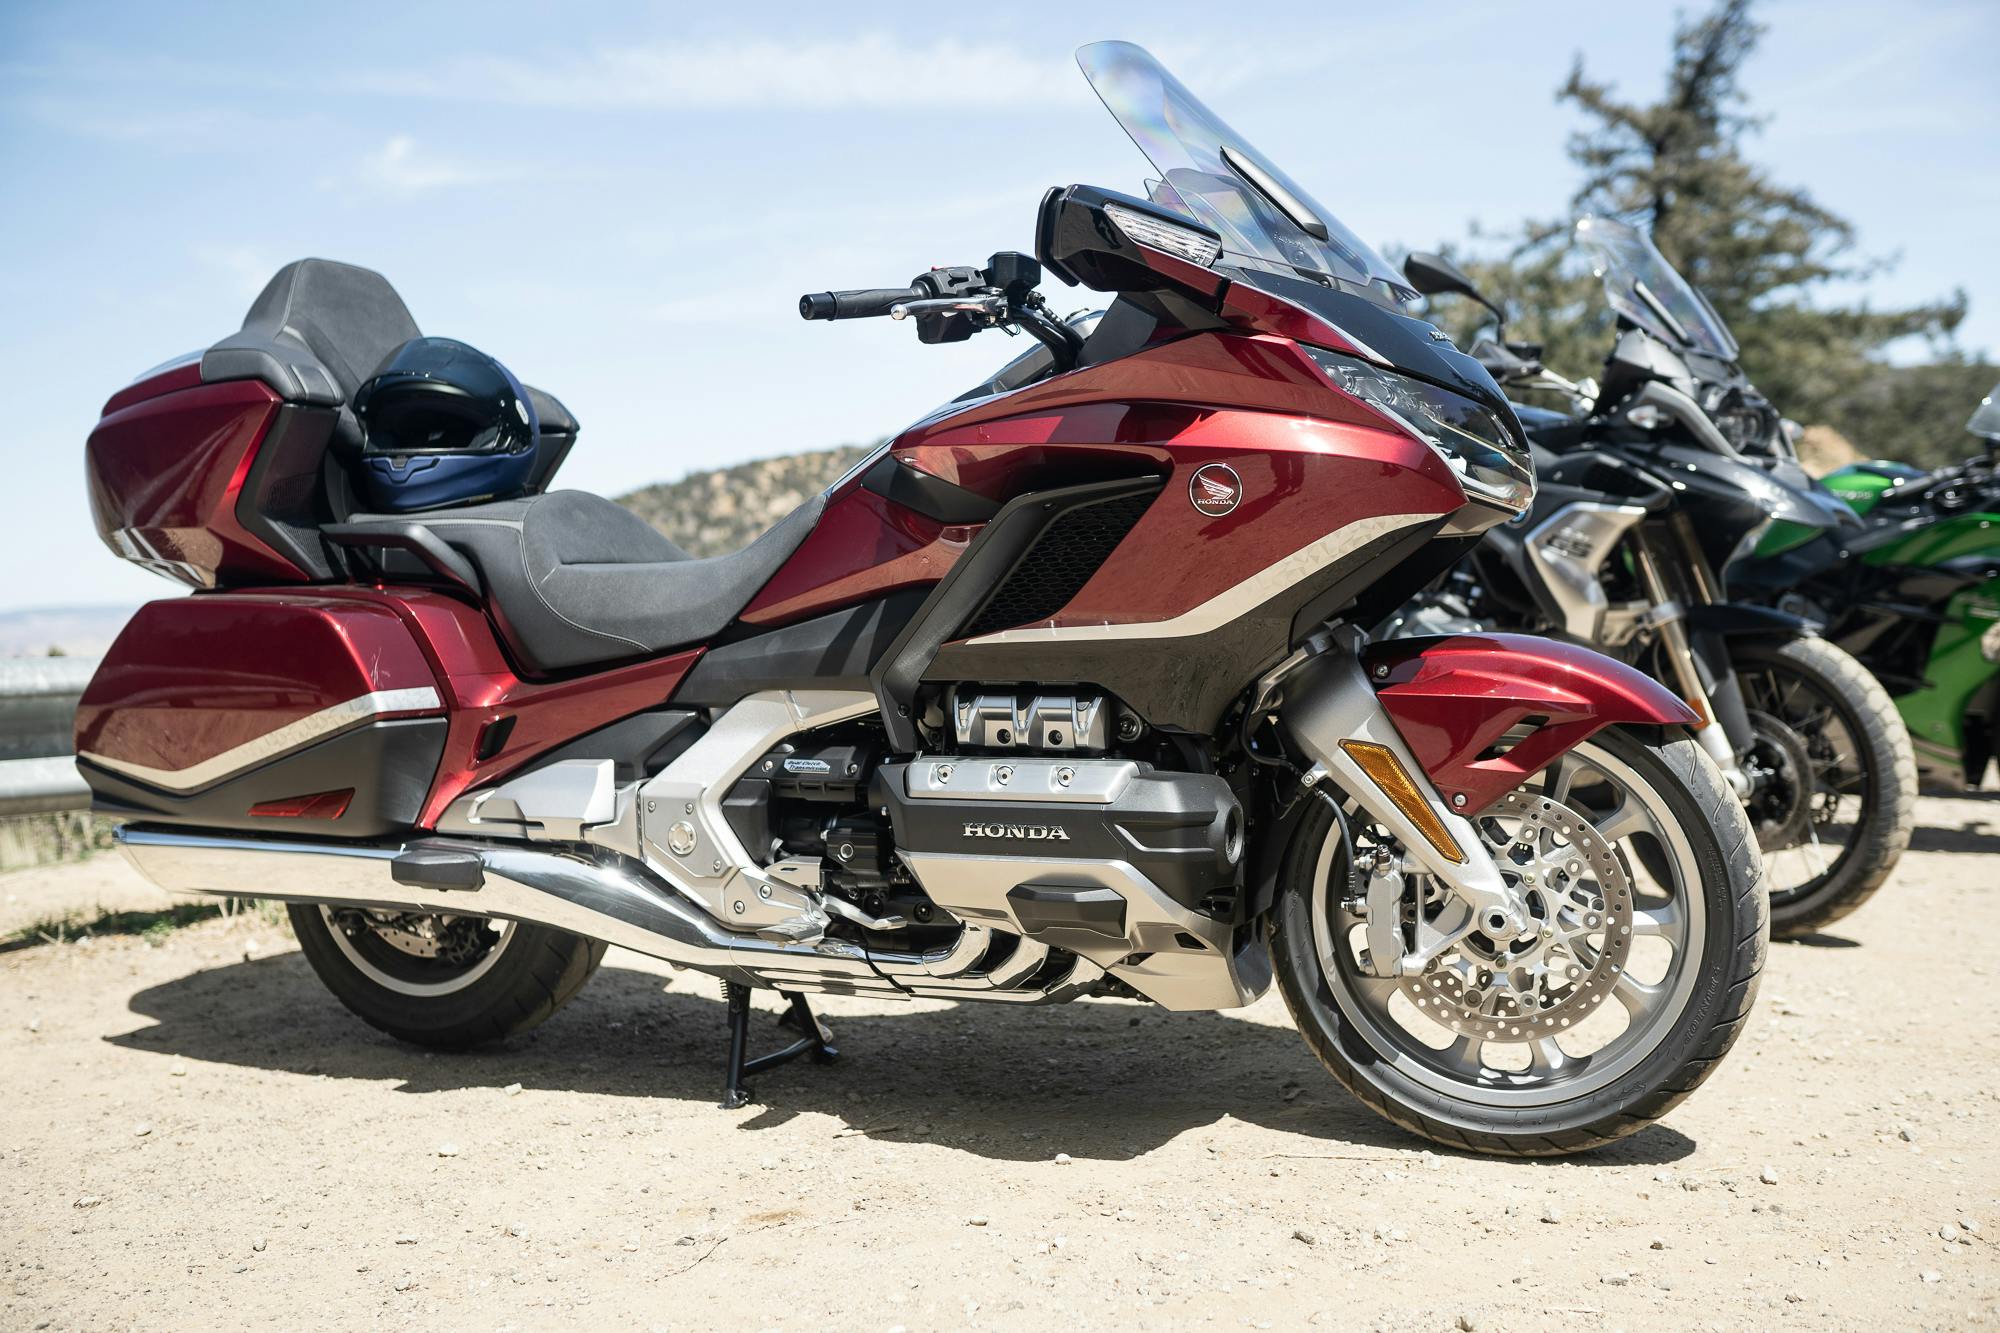 2021 Honda Gold Wing in group